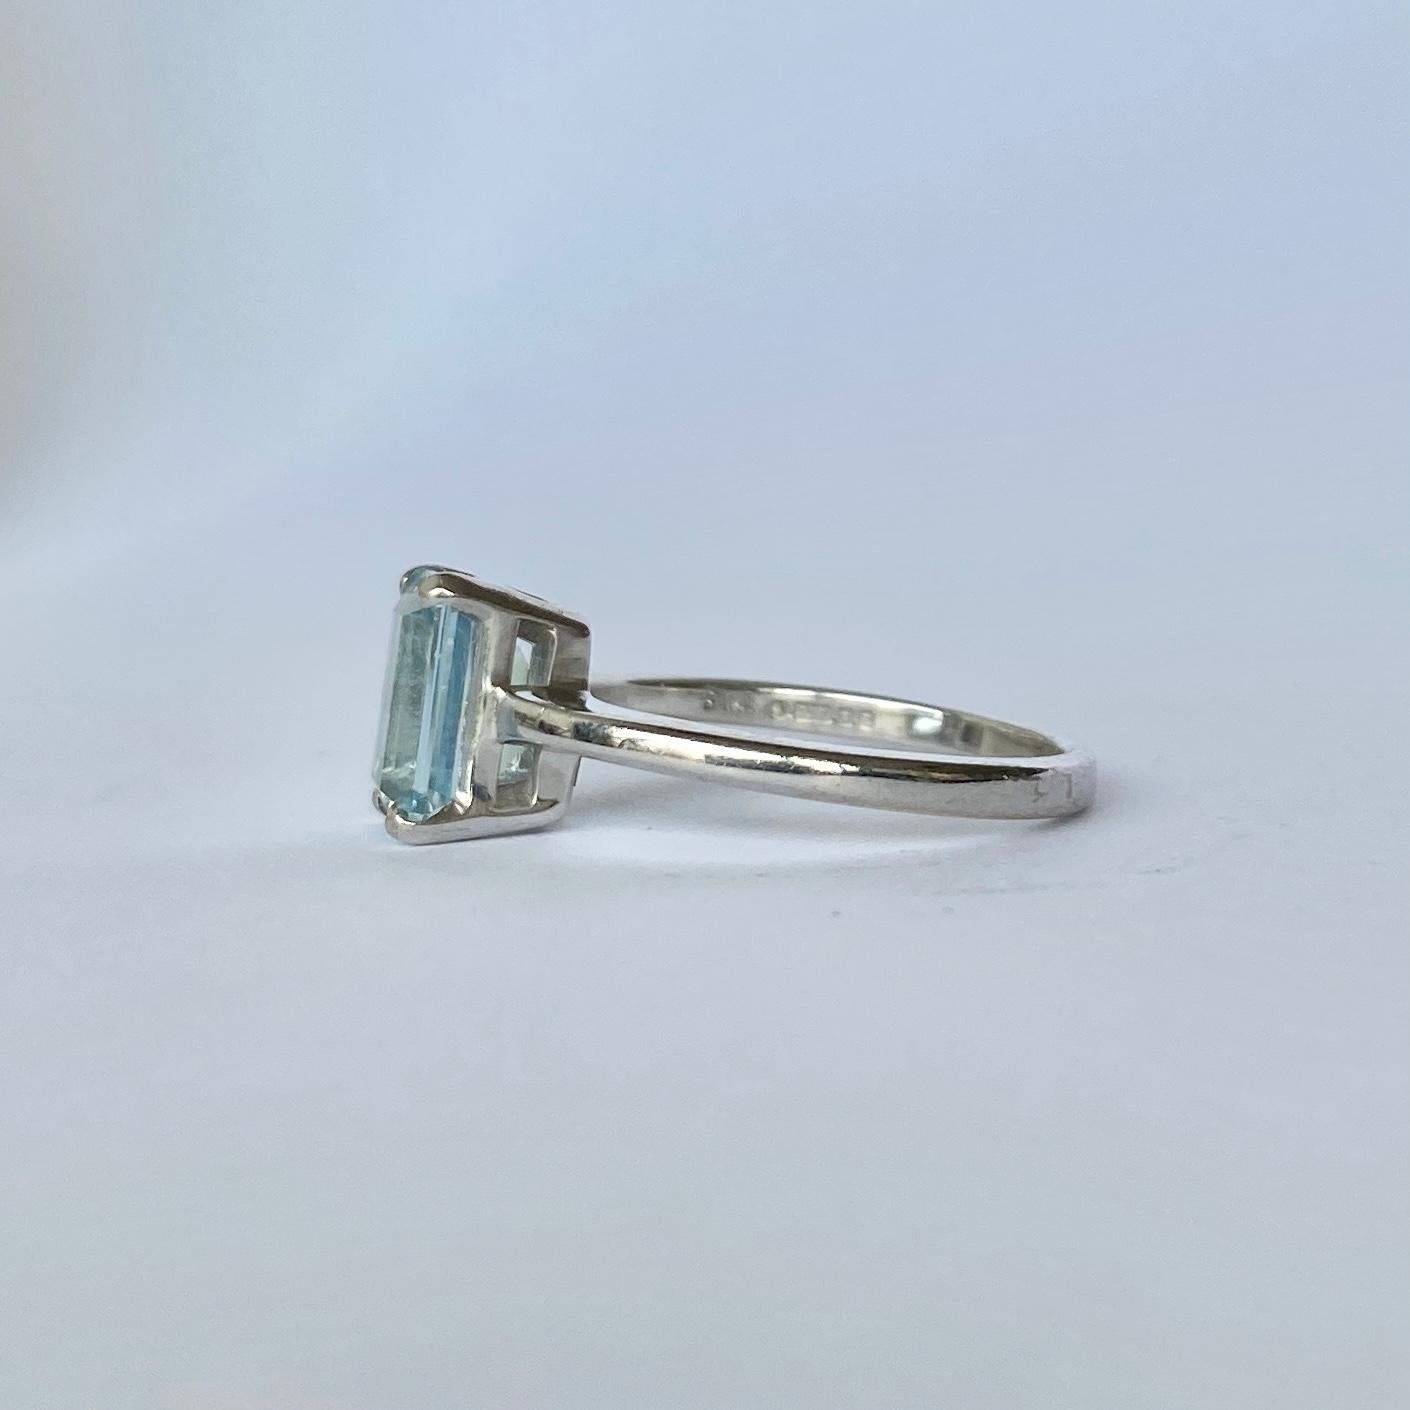 This stunning aqua is pale in colour and has a cut which gives a hall of mirrors effect. The shoulders, setting and band is modelled in 18ct white gold and is very simple in design. The stone measures approx 1carat. 

Ring Size: K or 5 1/4 
Height